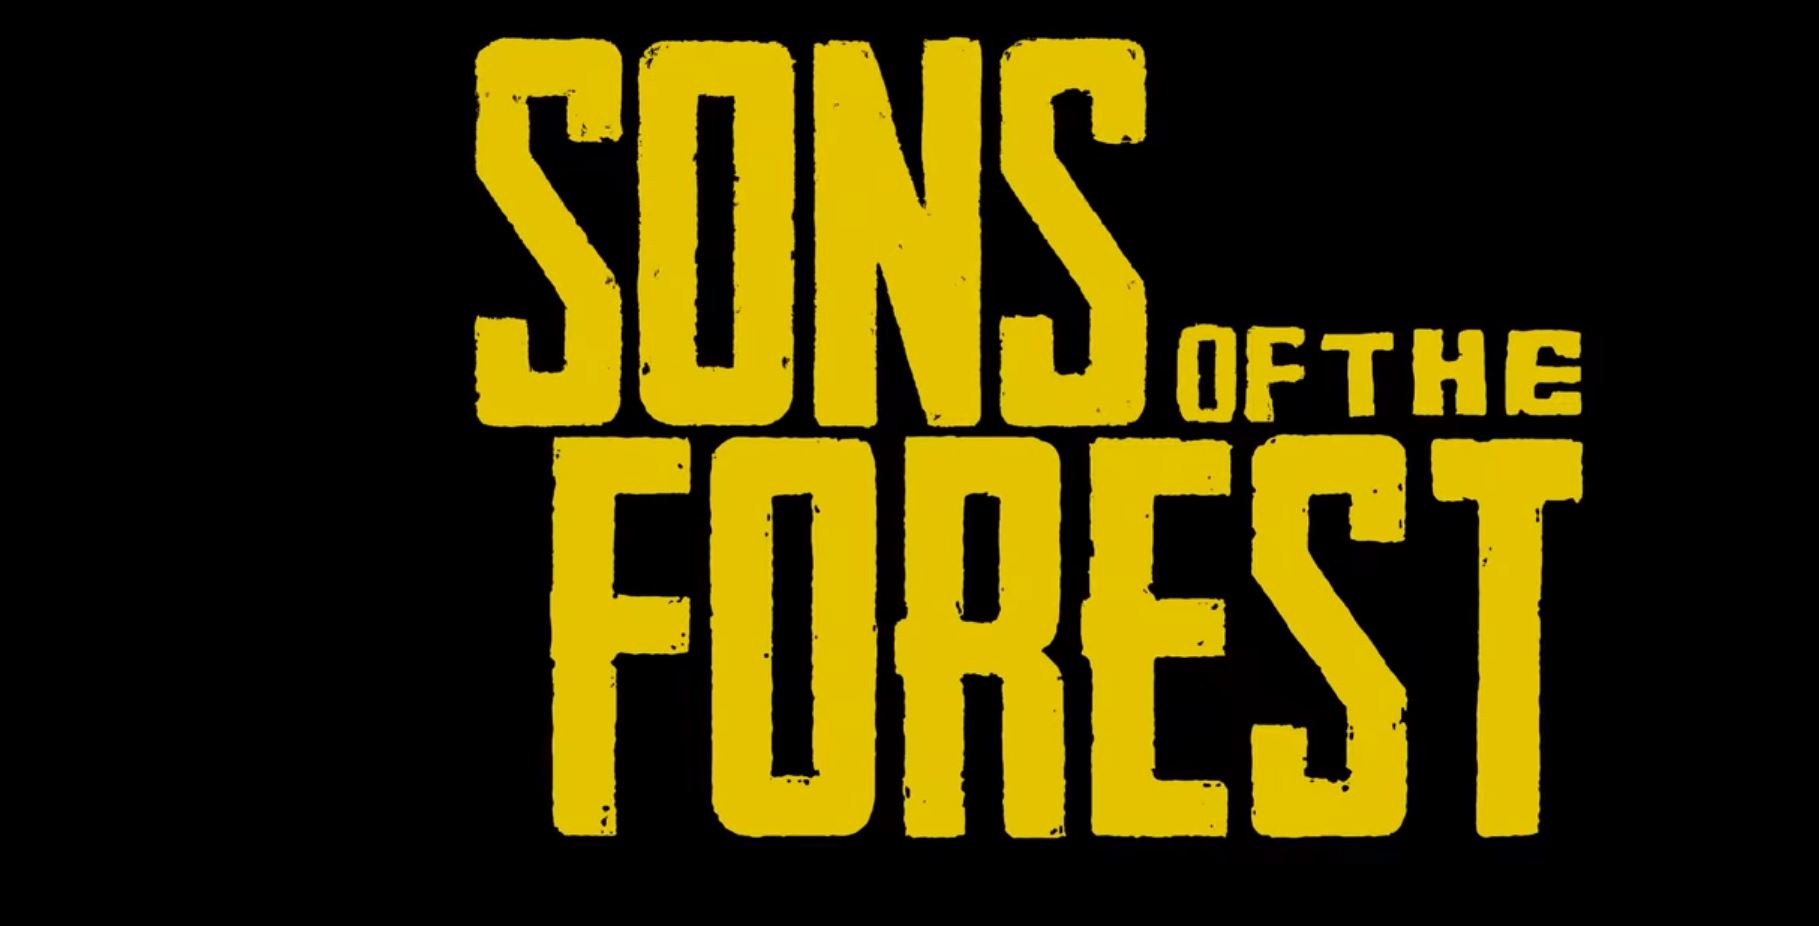 Sons Of The Forest Wallpaper